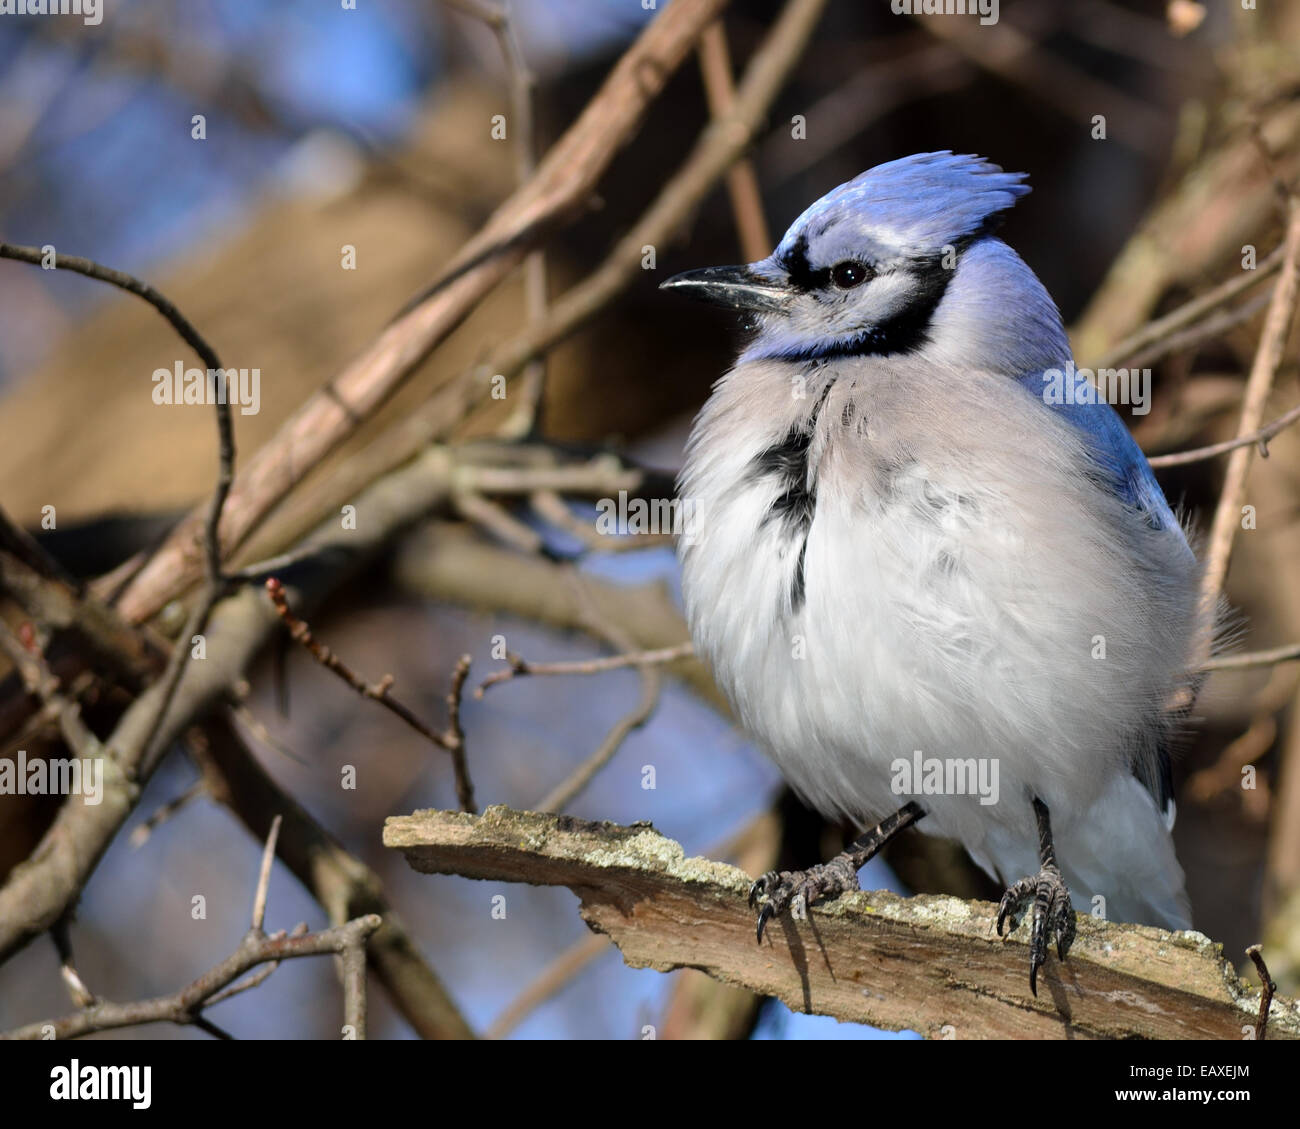 A blue jay perched on a tree branch. Stock Photo